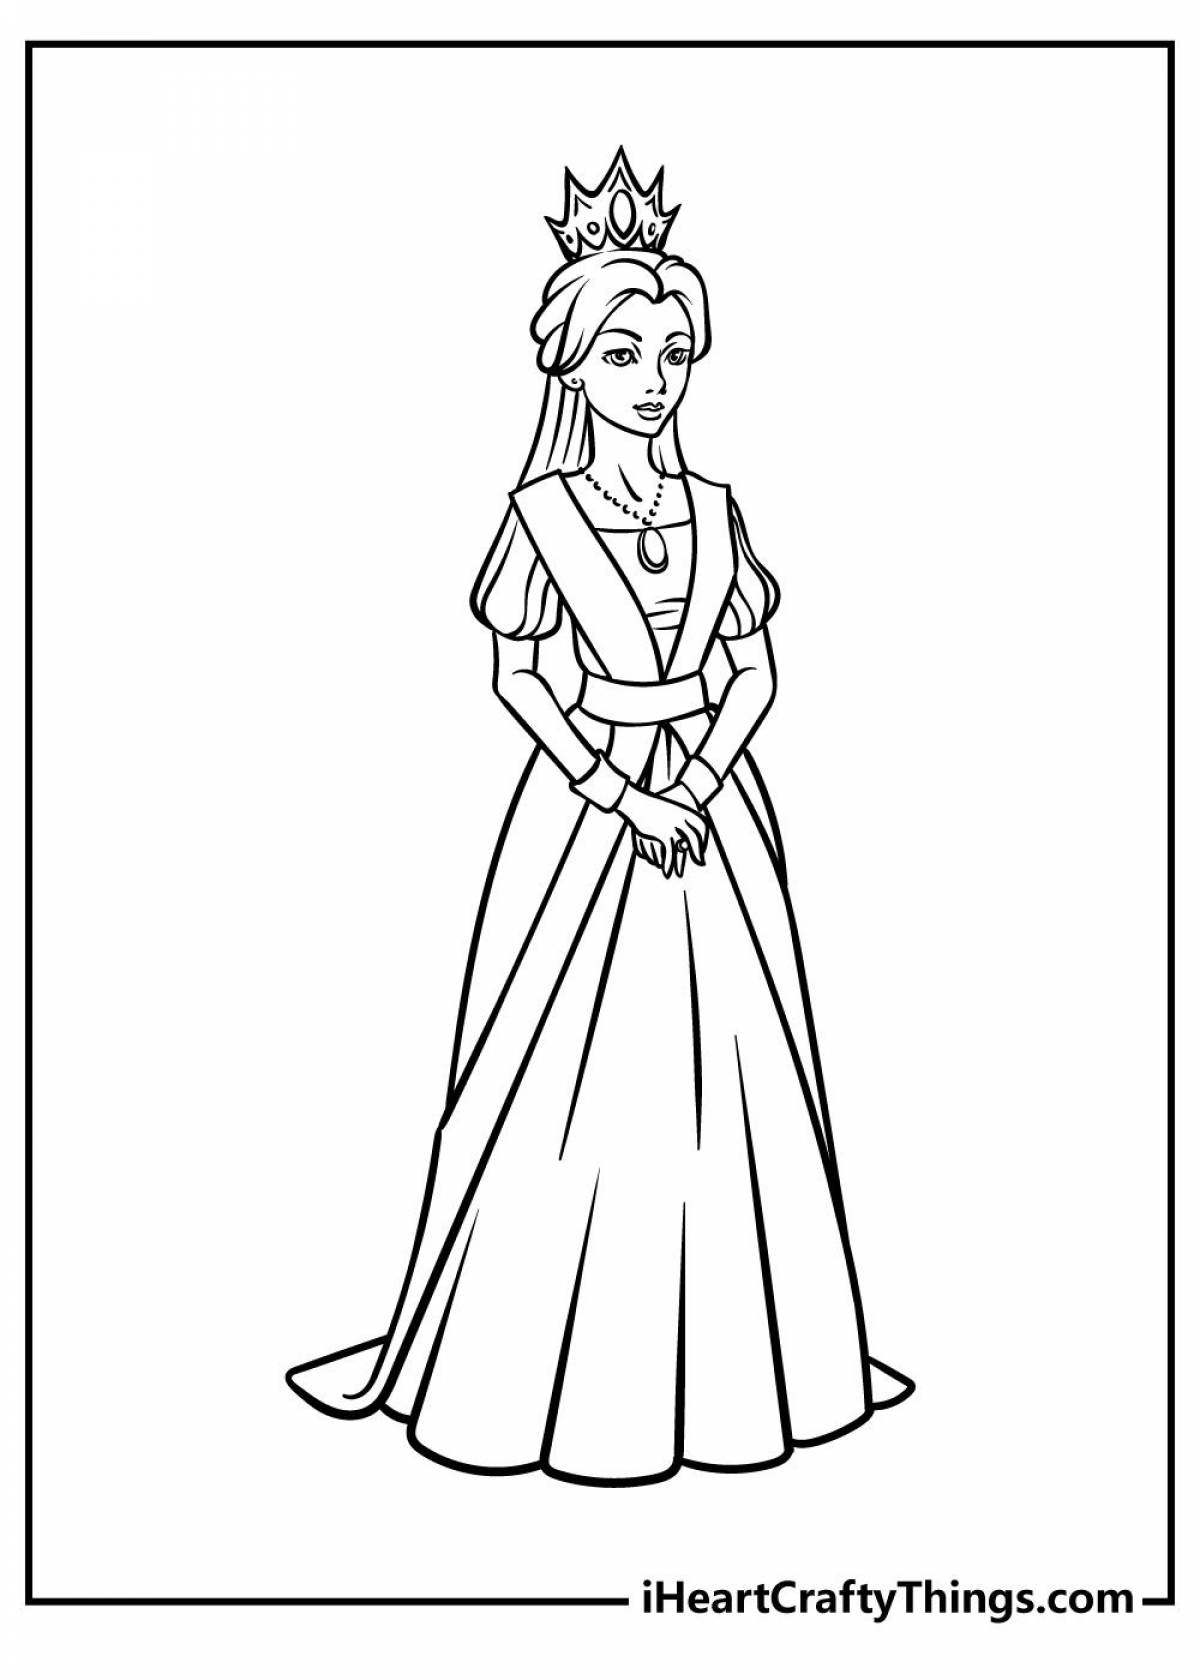 Glorious queen coloring pages for kids